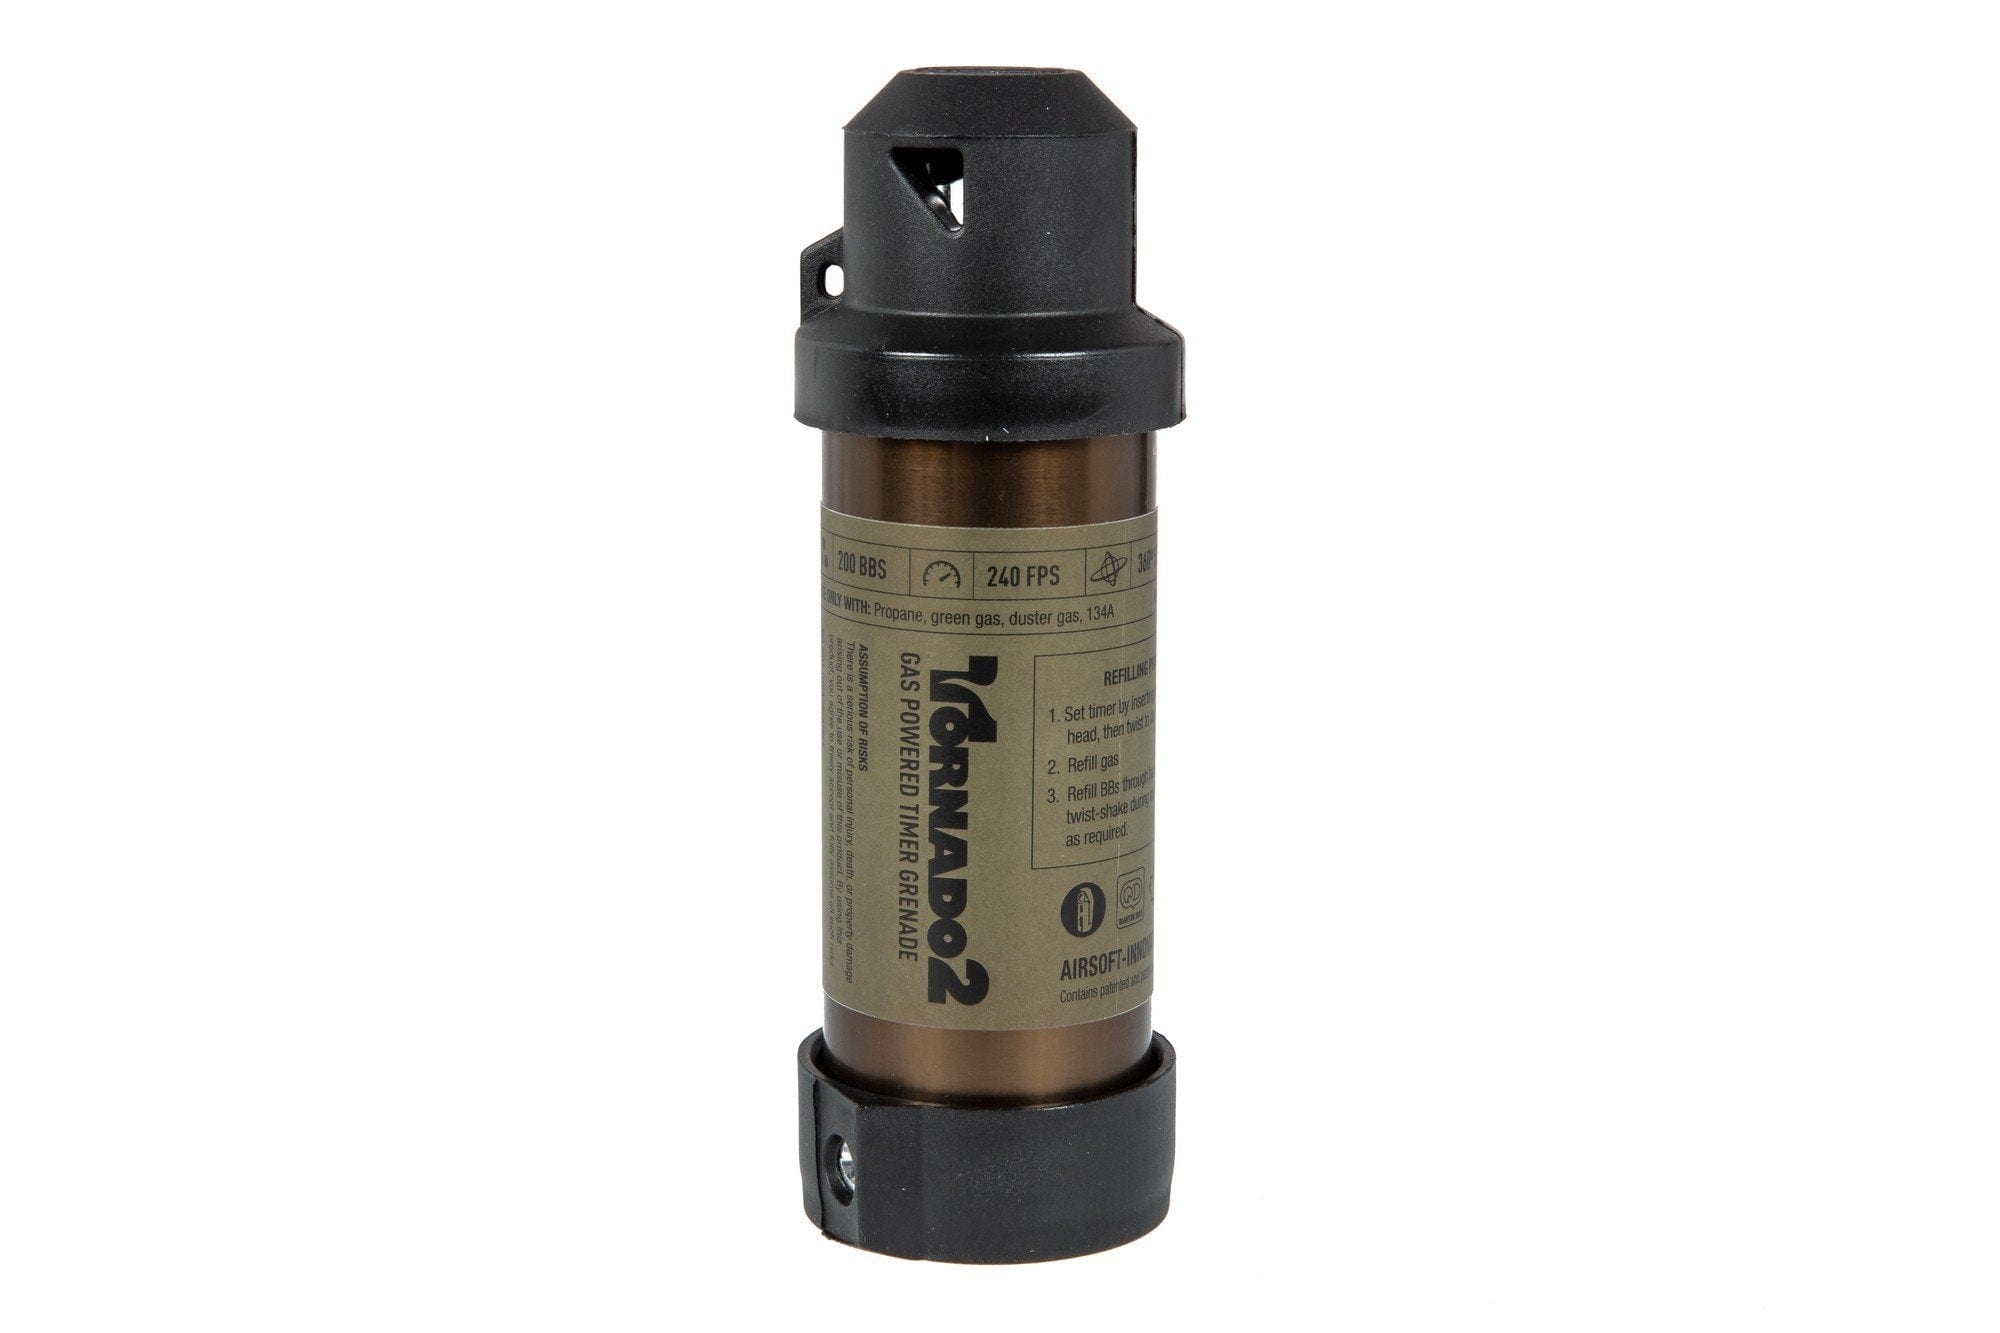 Tornado 2 Timer Gas Grenade - Launch Edition FDE by Airsoft Innovations on Airsoft Mania Europe